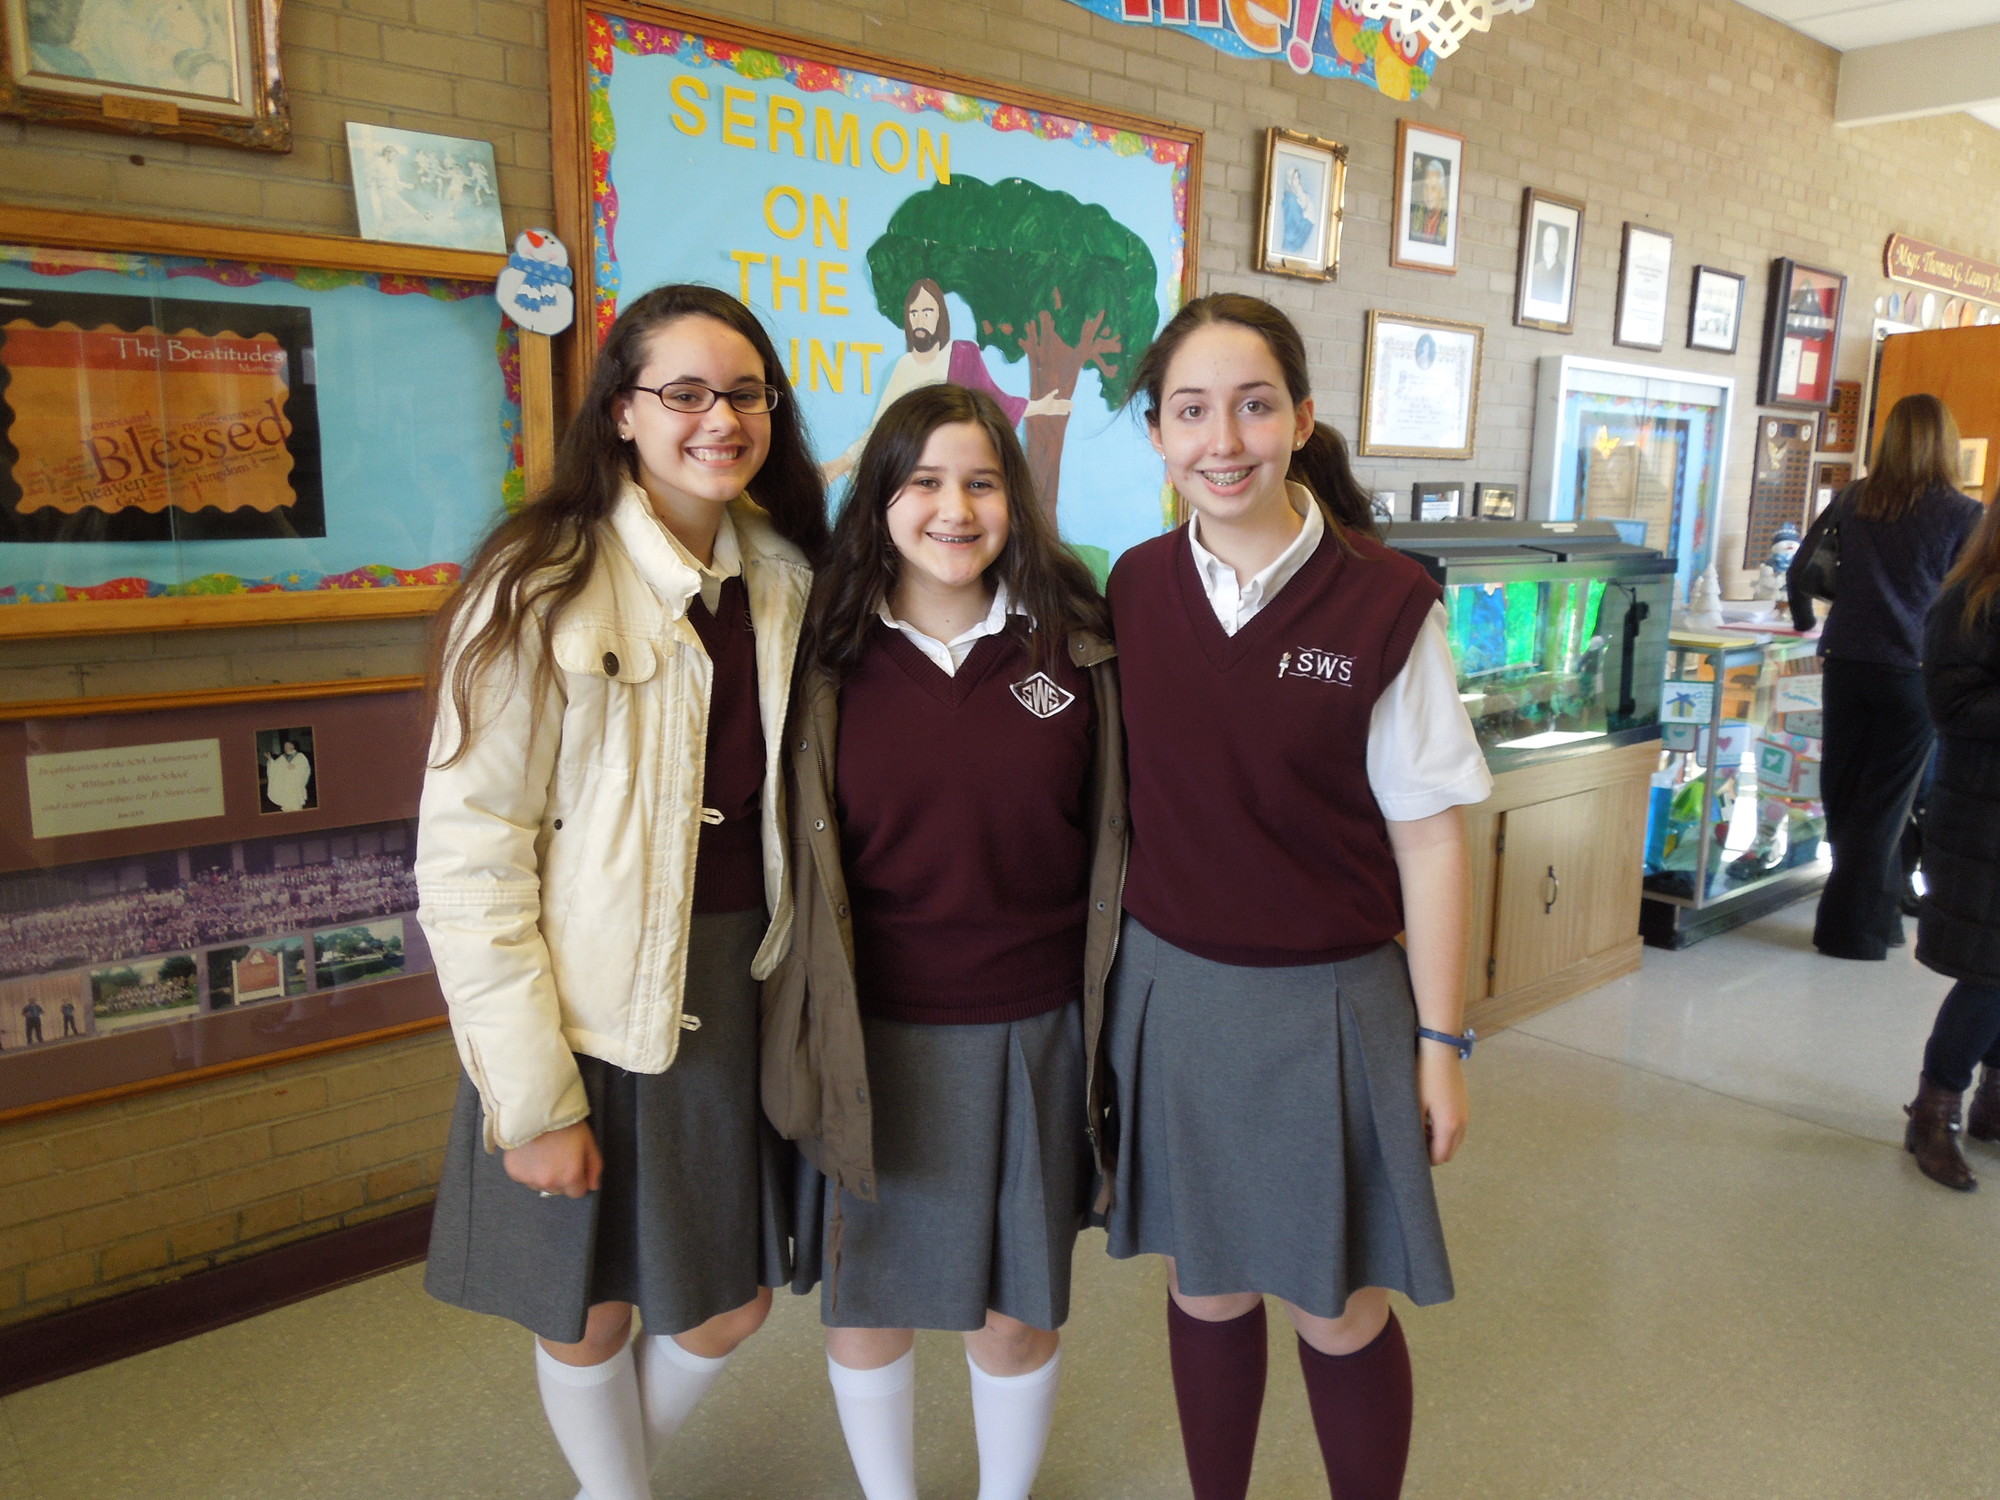 St. William the Abbot School eighth-graders, from left, Olivia Lattieri, Ava Azueta and Meghan Monahan were tour guides at the open house on Jan. 25 marking the beginning of Catholic Schools Week.